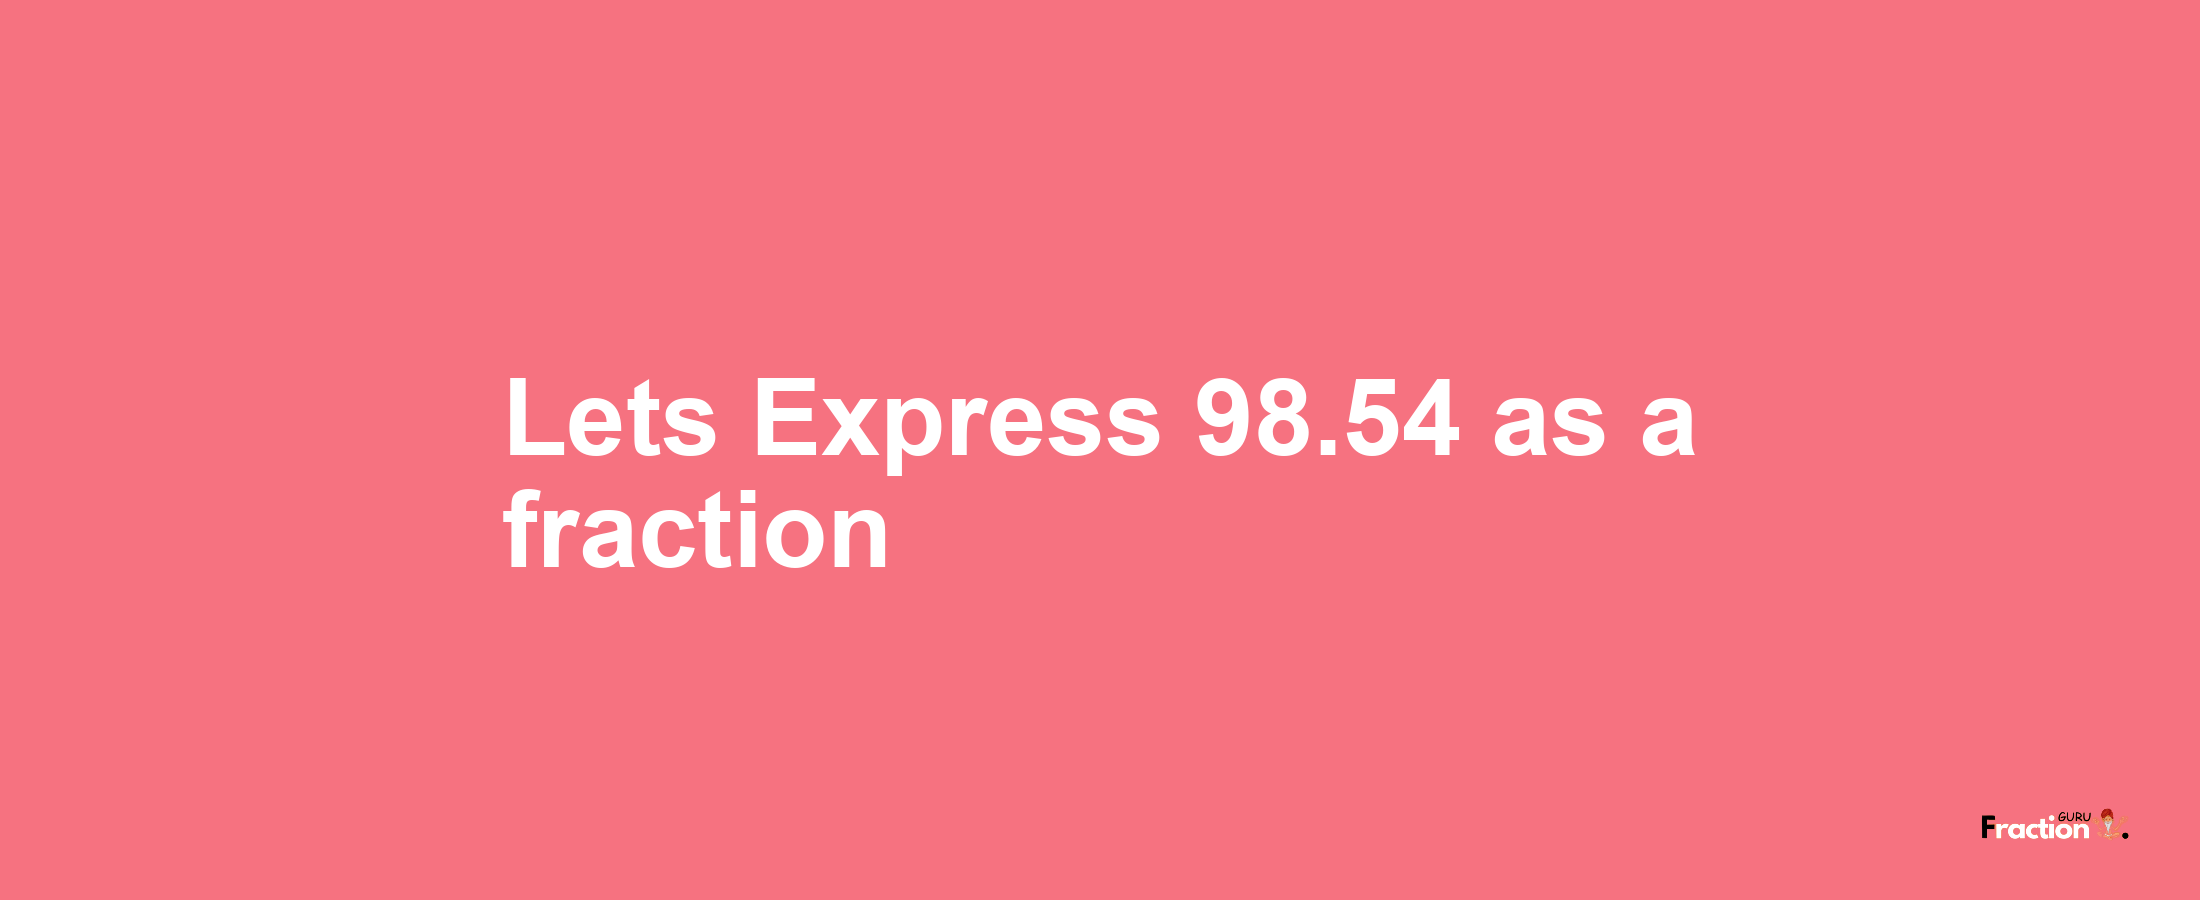 Lets Express 98.54 as afraction